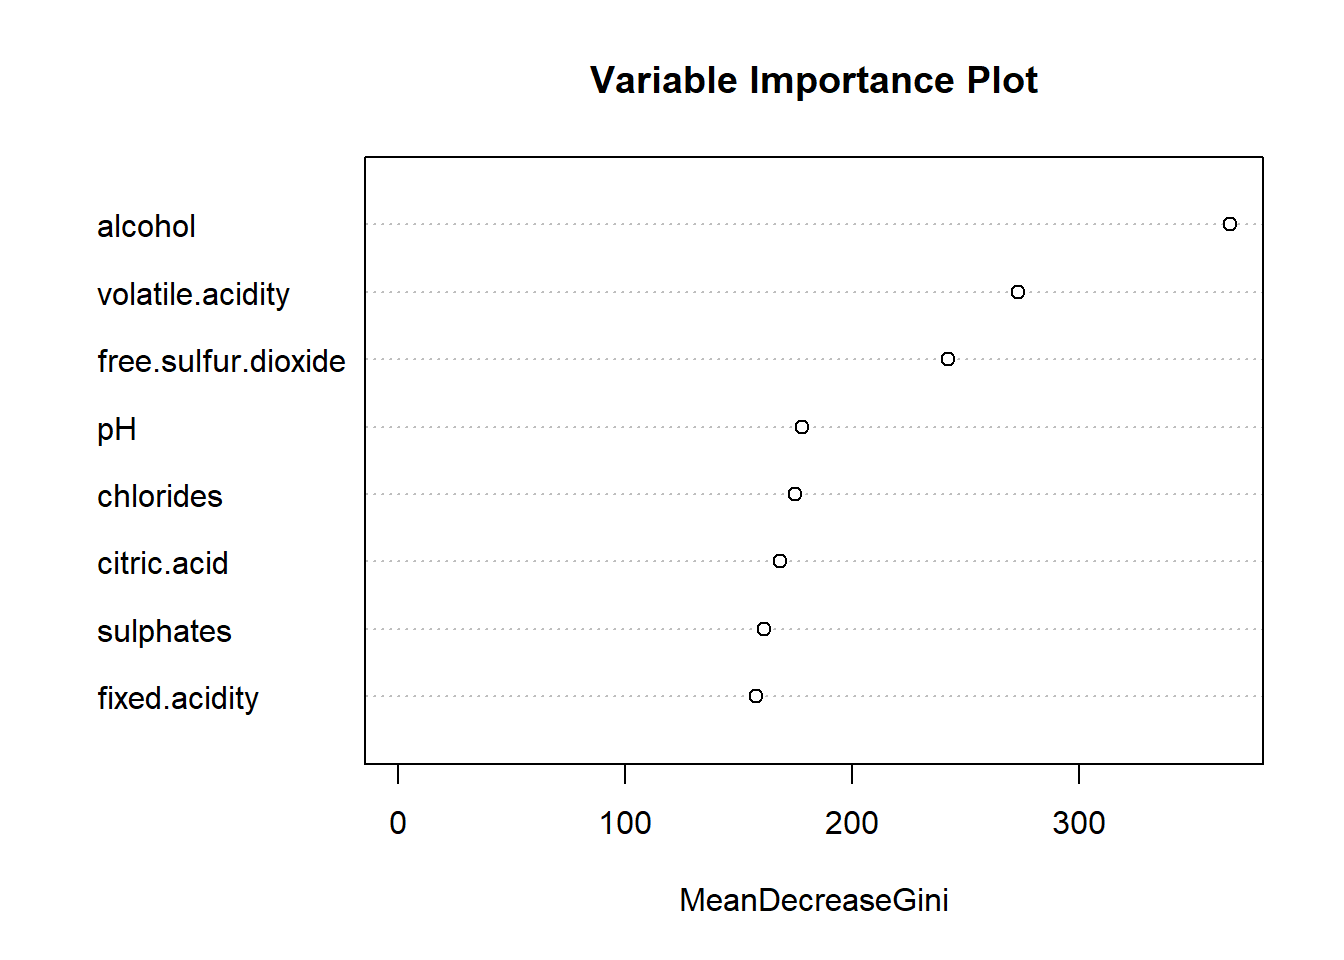 Variable Importance Plot comparing the Gini impurity index